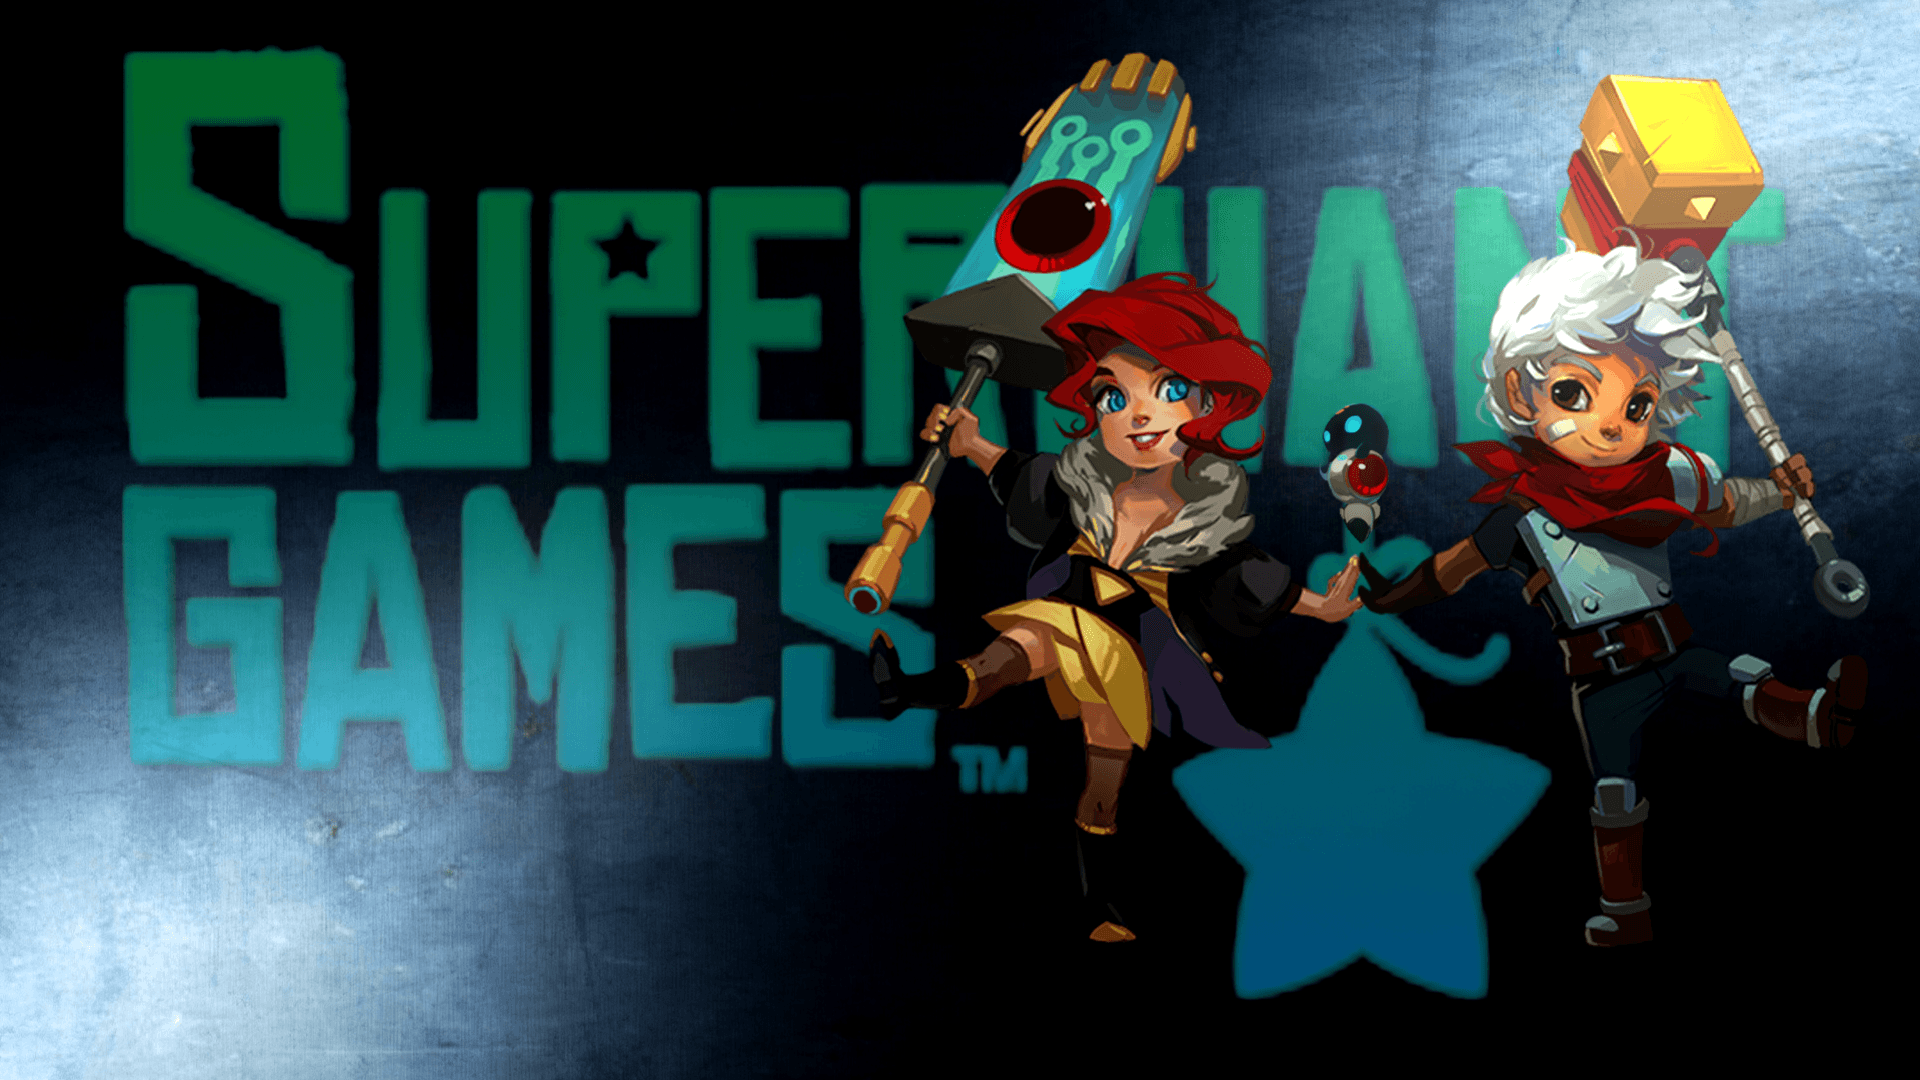 I Made An Edit Of A Bastion Transistor Wallpaper. Thought You Guys